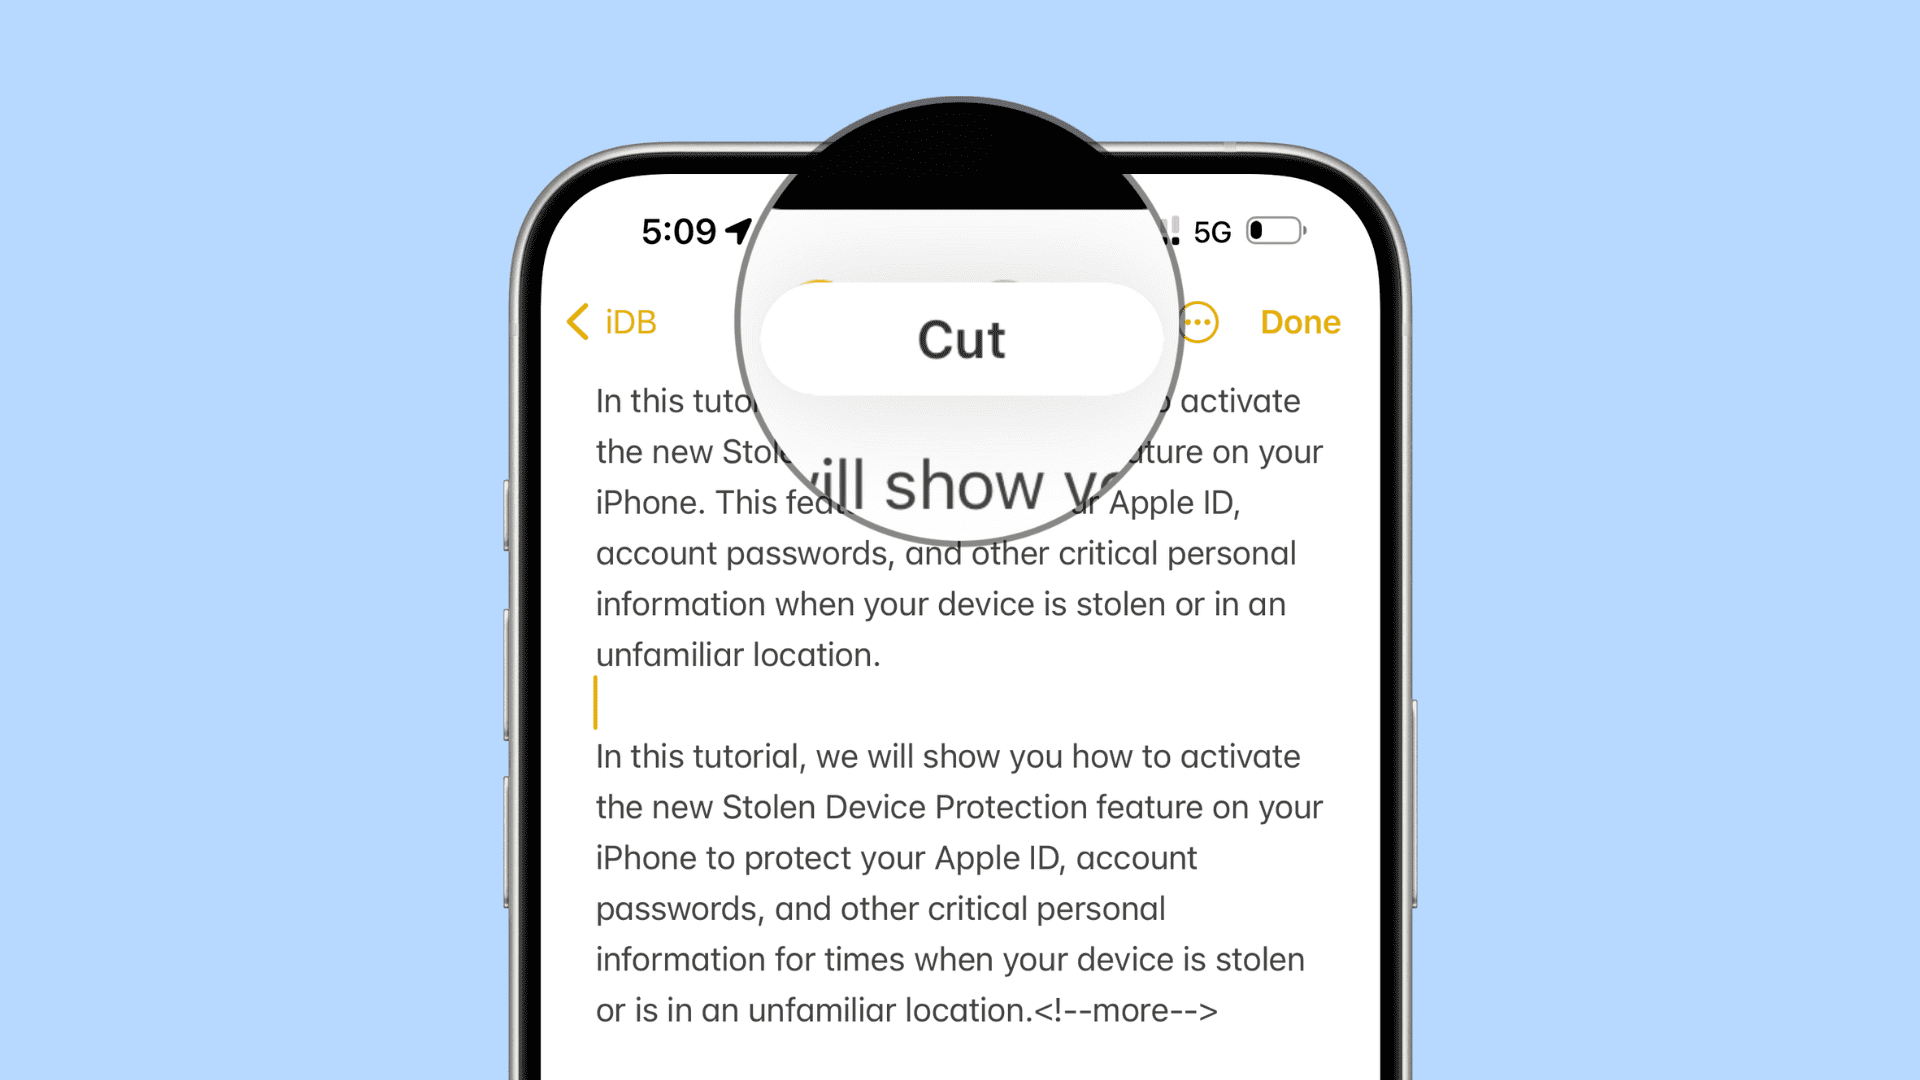 Cut gesture in action on iPhone